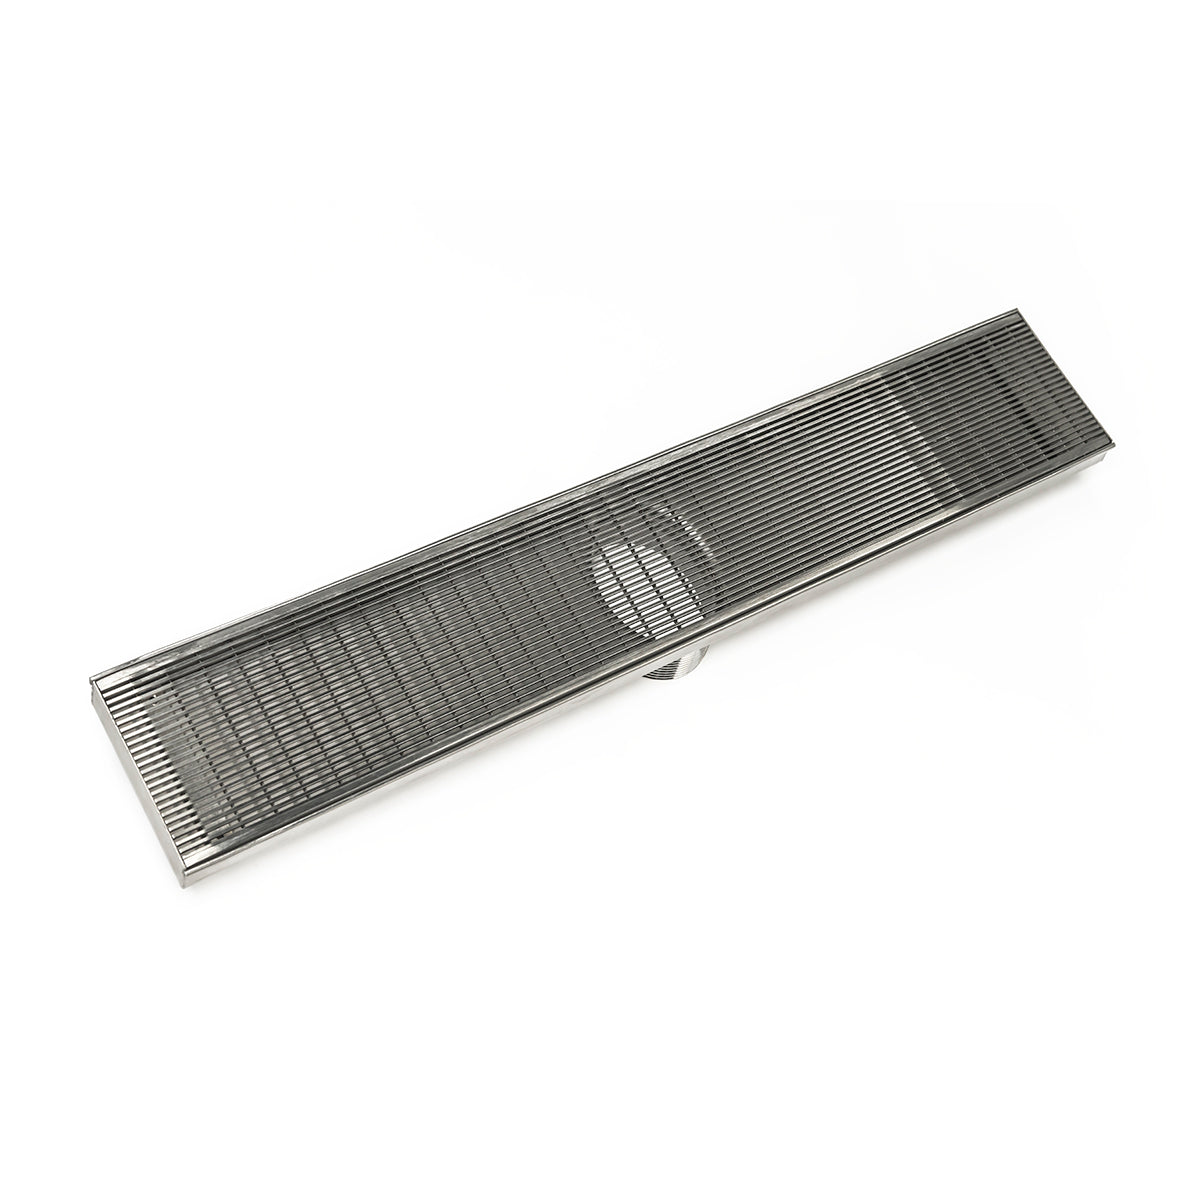 Infinity Drain 36" FX Series High Flow Fixed Length Linear Drain Kit with Wedge Wire Grate with Cast Iron Drain Body